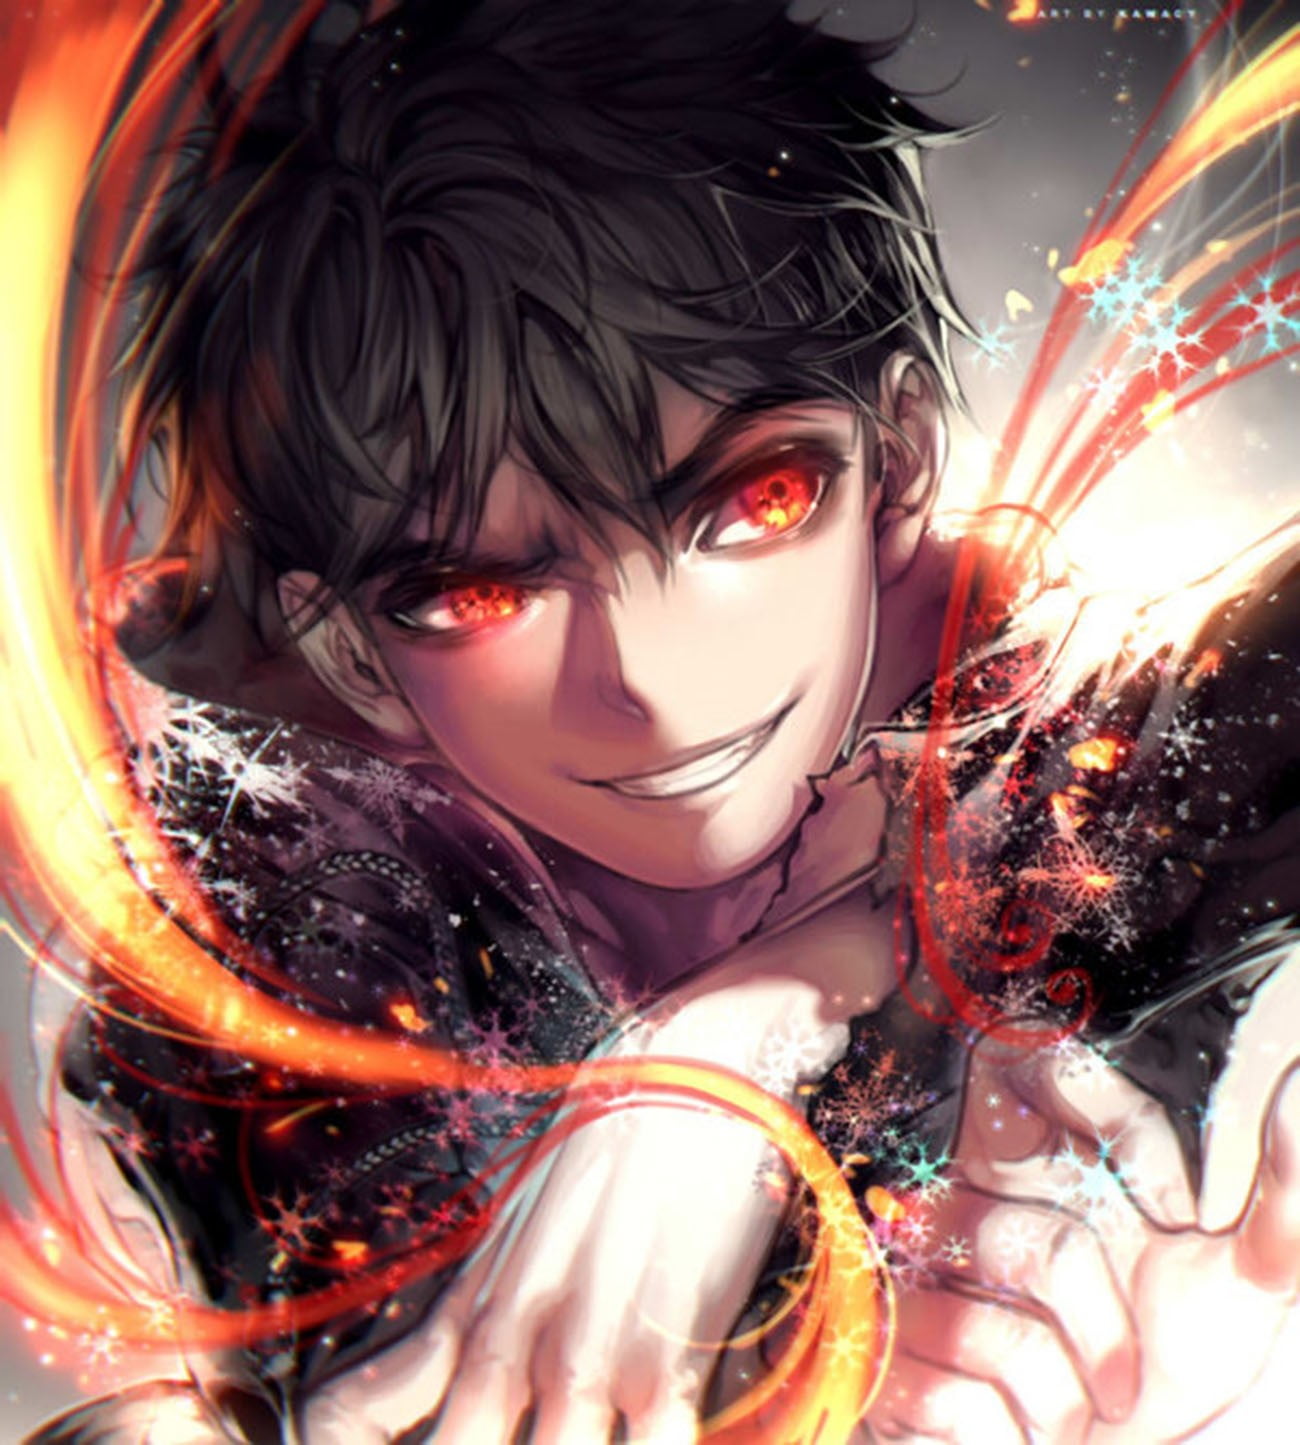 Male anime character wallpaper, Jack Nightmare, anime boys, red eyes